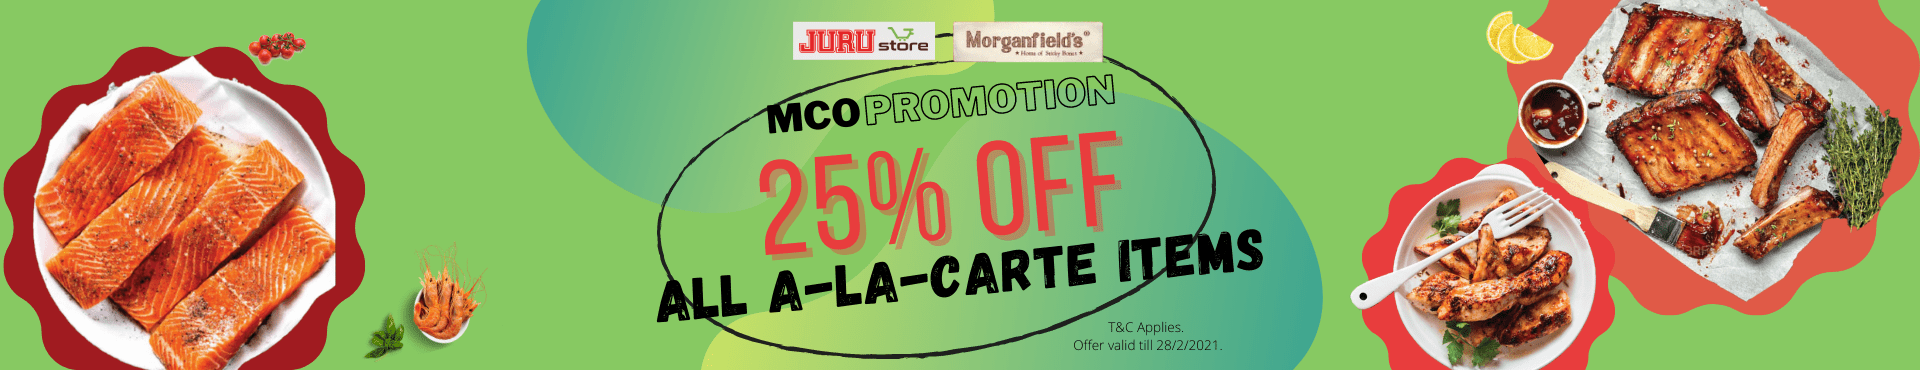 MCO Promotion: 25% off ALL Morganfield’s A-la-carte Items